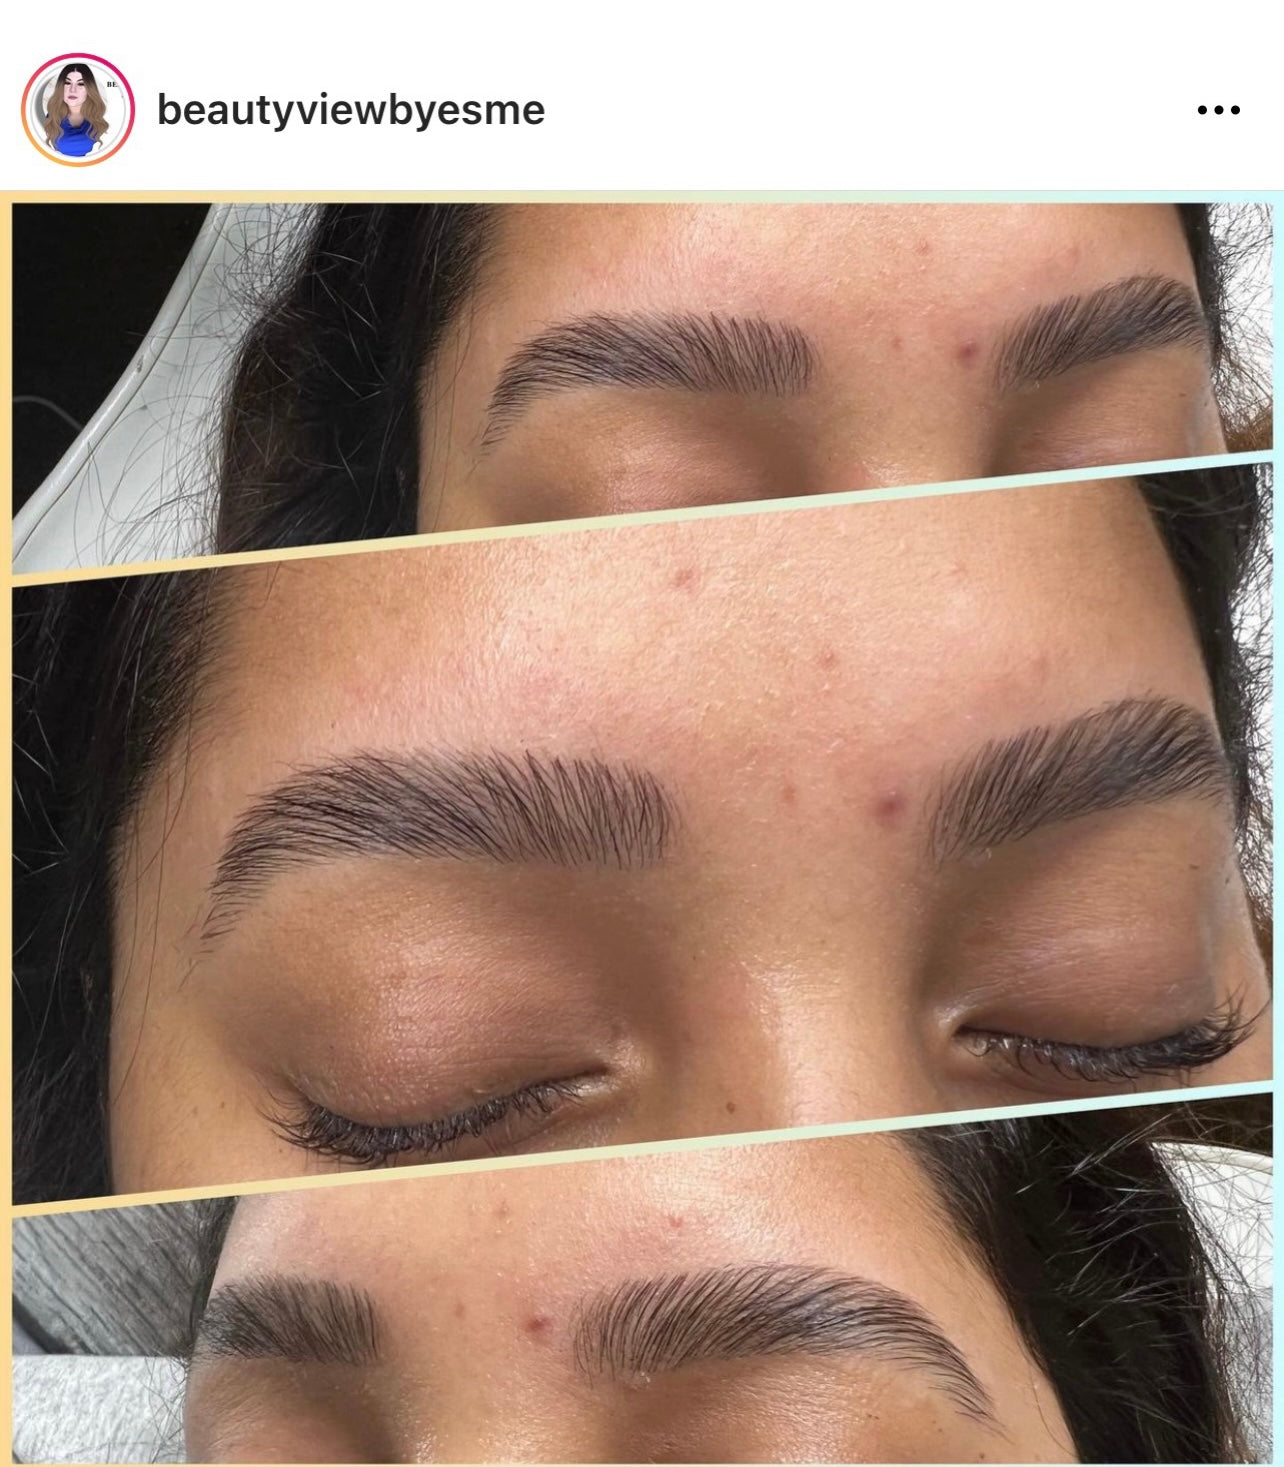 Master Brow Shaping With Eyebrow Threading Classes In Seattle –  MylashnbrowsAcademy